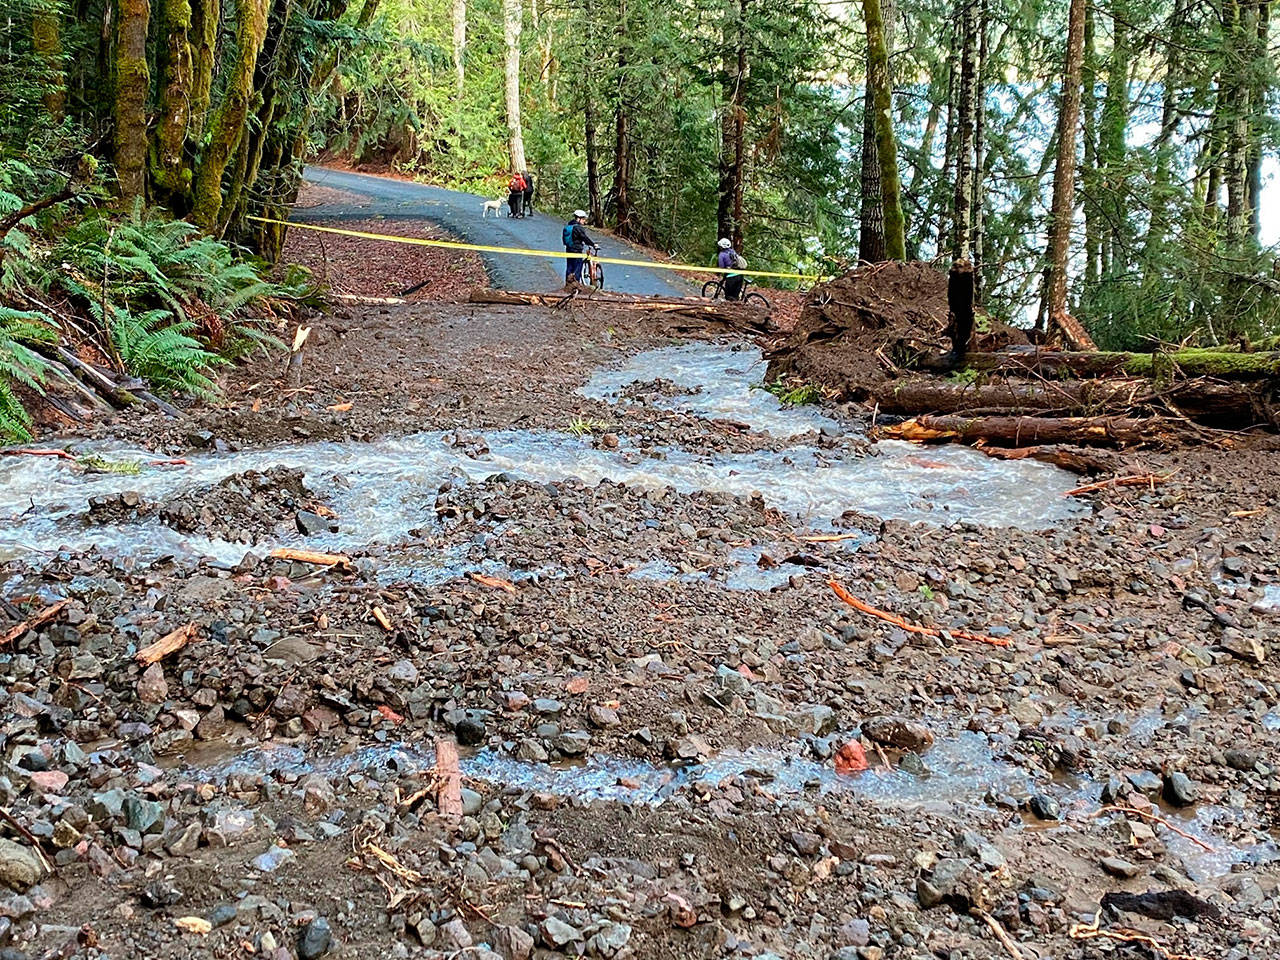 Photo courtesy of Noel Carey
A landslide blocks safe passage along the Spruce Railroad Trail. Olympic National Park officials said heavy rain was the cause.